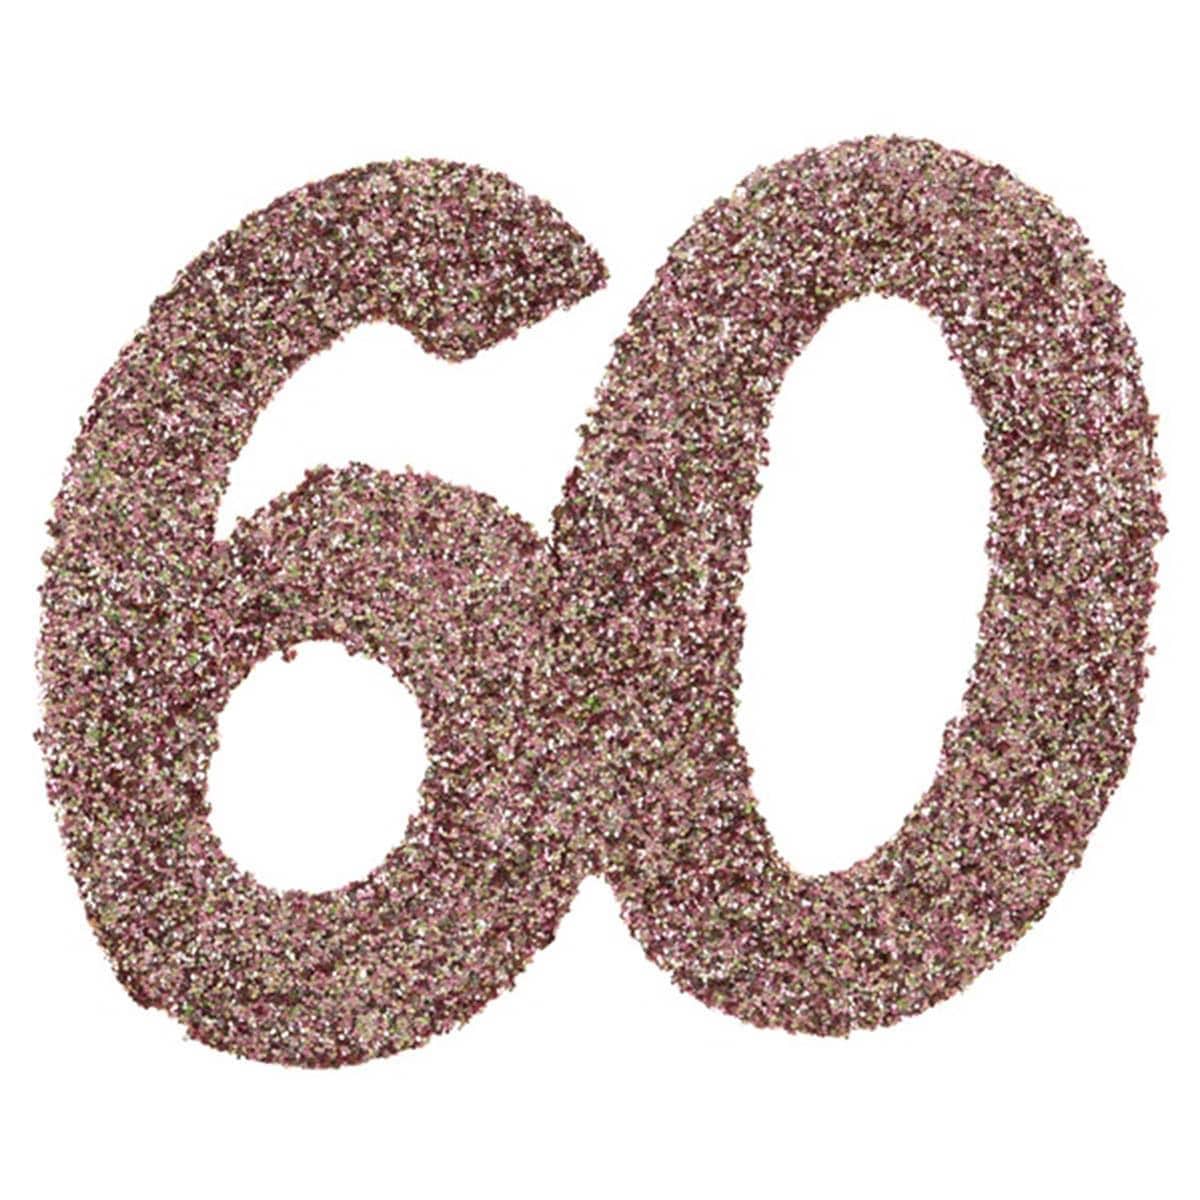 SANTEX Age Specific Birthday Glittery Number 60 Decoration, Rose Gold, 6 Count